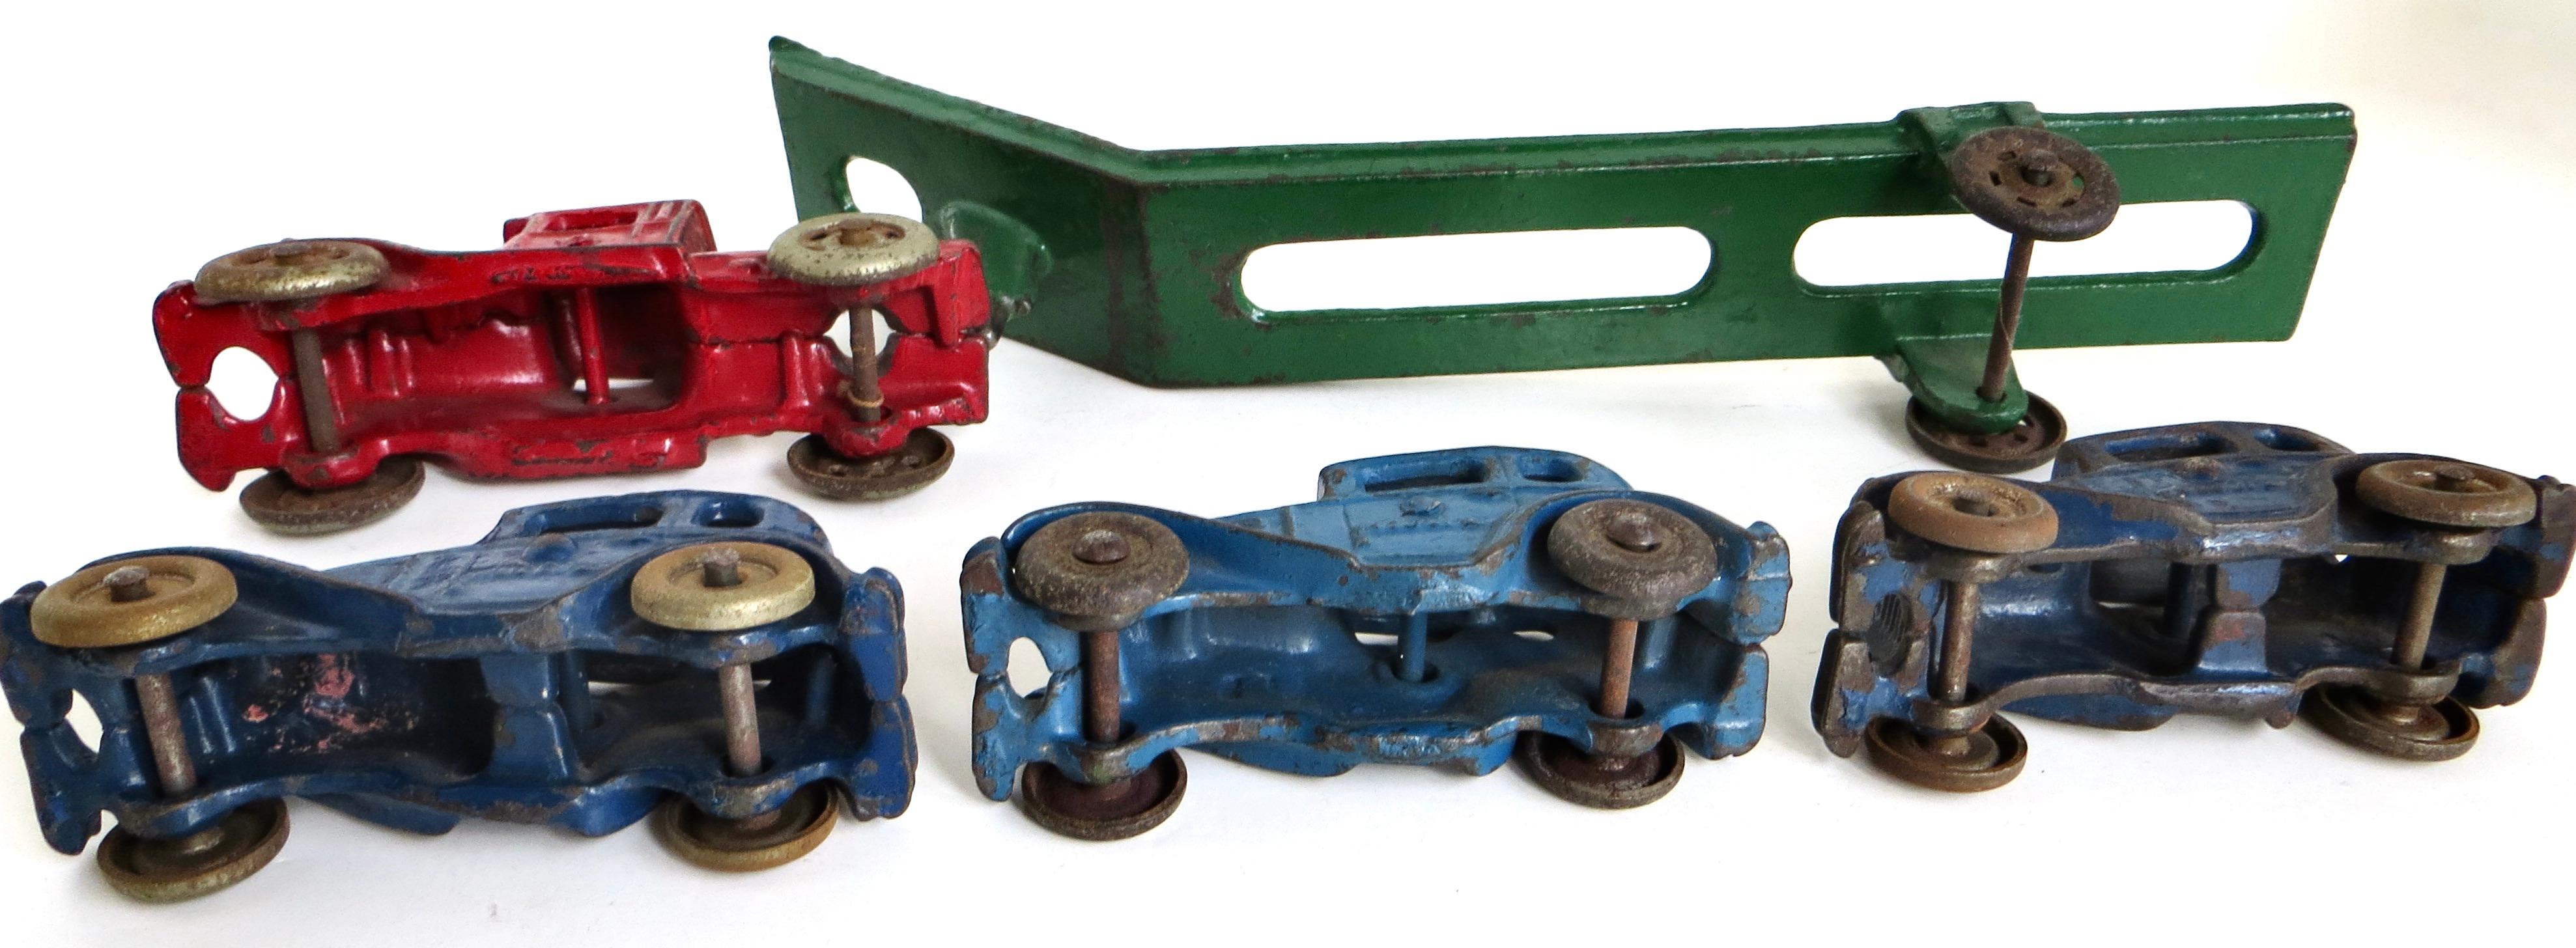 Toy Cast Iron Truck Car Carrier; Three Cars by A.C. Williams American Circa 1930 For Sale 5